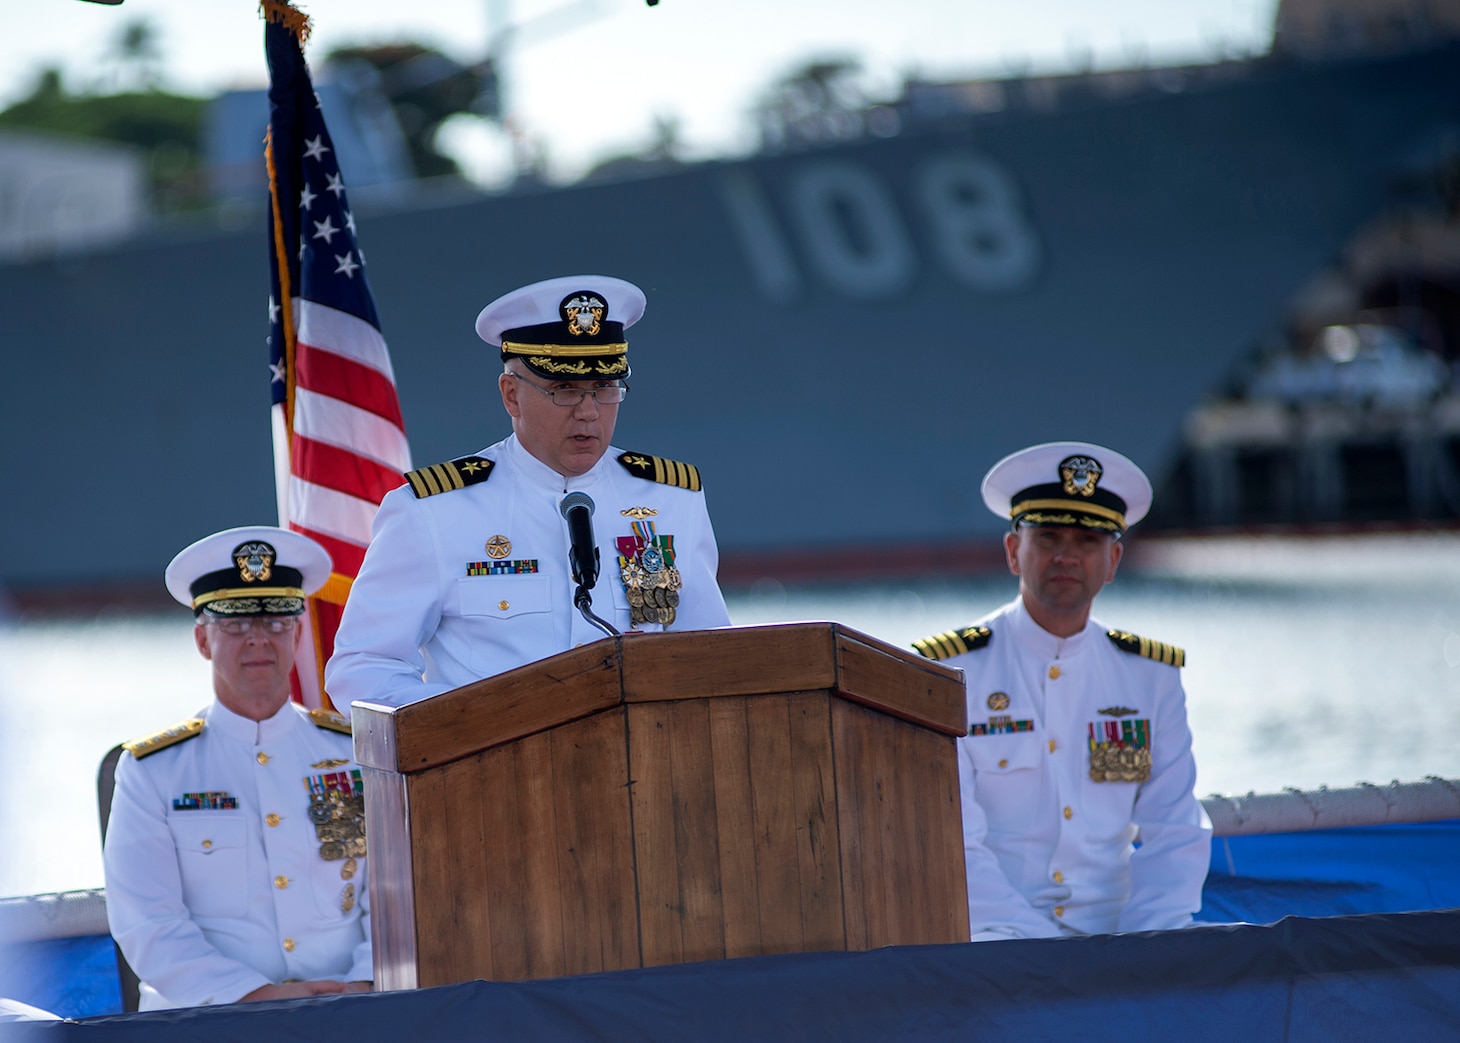 PEARL HARBOR (Jan. 08, 2019) - Capt. Richard Seif addresses guests during a change of command ceremony for Commander, Submarine Squadron One, on the submarine piers in Joint Base Pearl Harbor-Hickam, Jan. 08. (U.S. Navy photo by Mass Communication Specialist 2nd Class Melvin J. Gonzalvo)